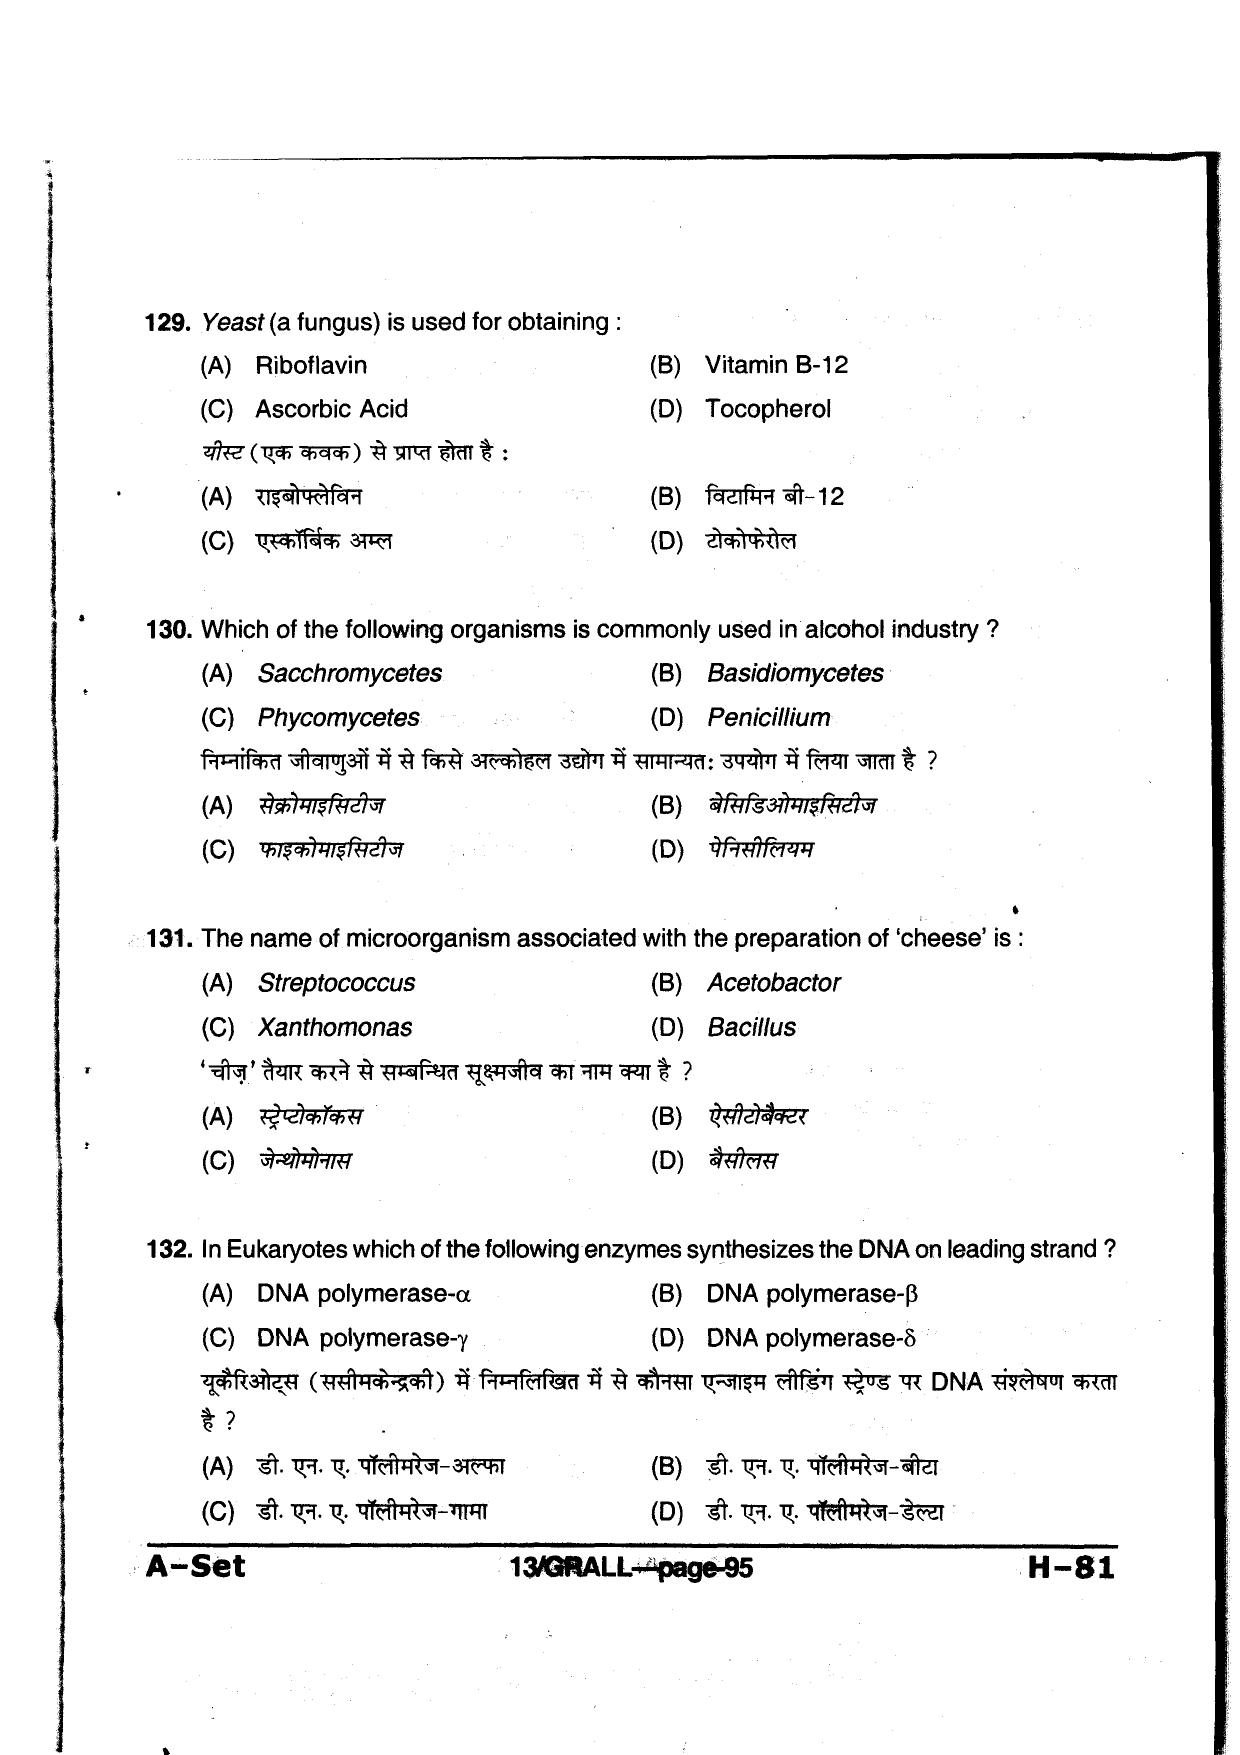 MP PAT 2013 Question Paper - Paper I - Page 95